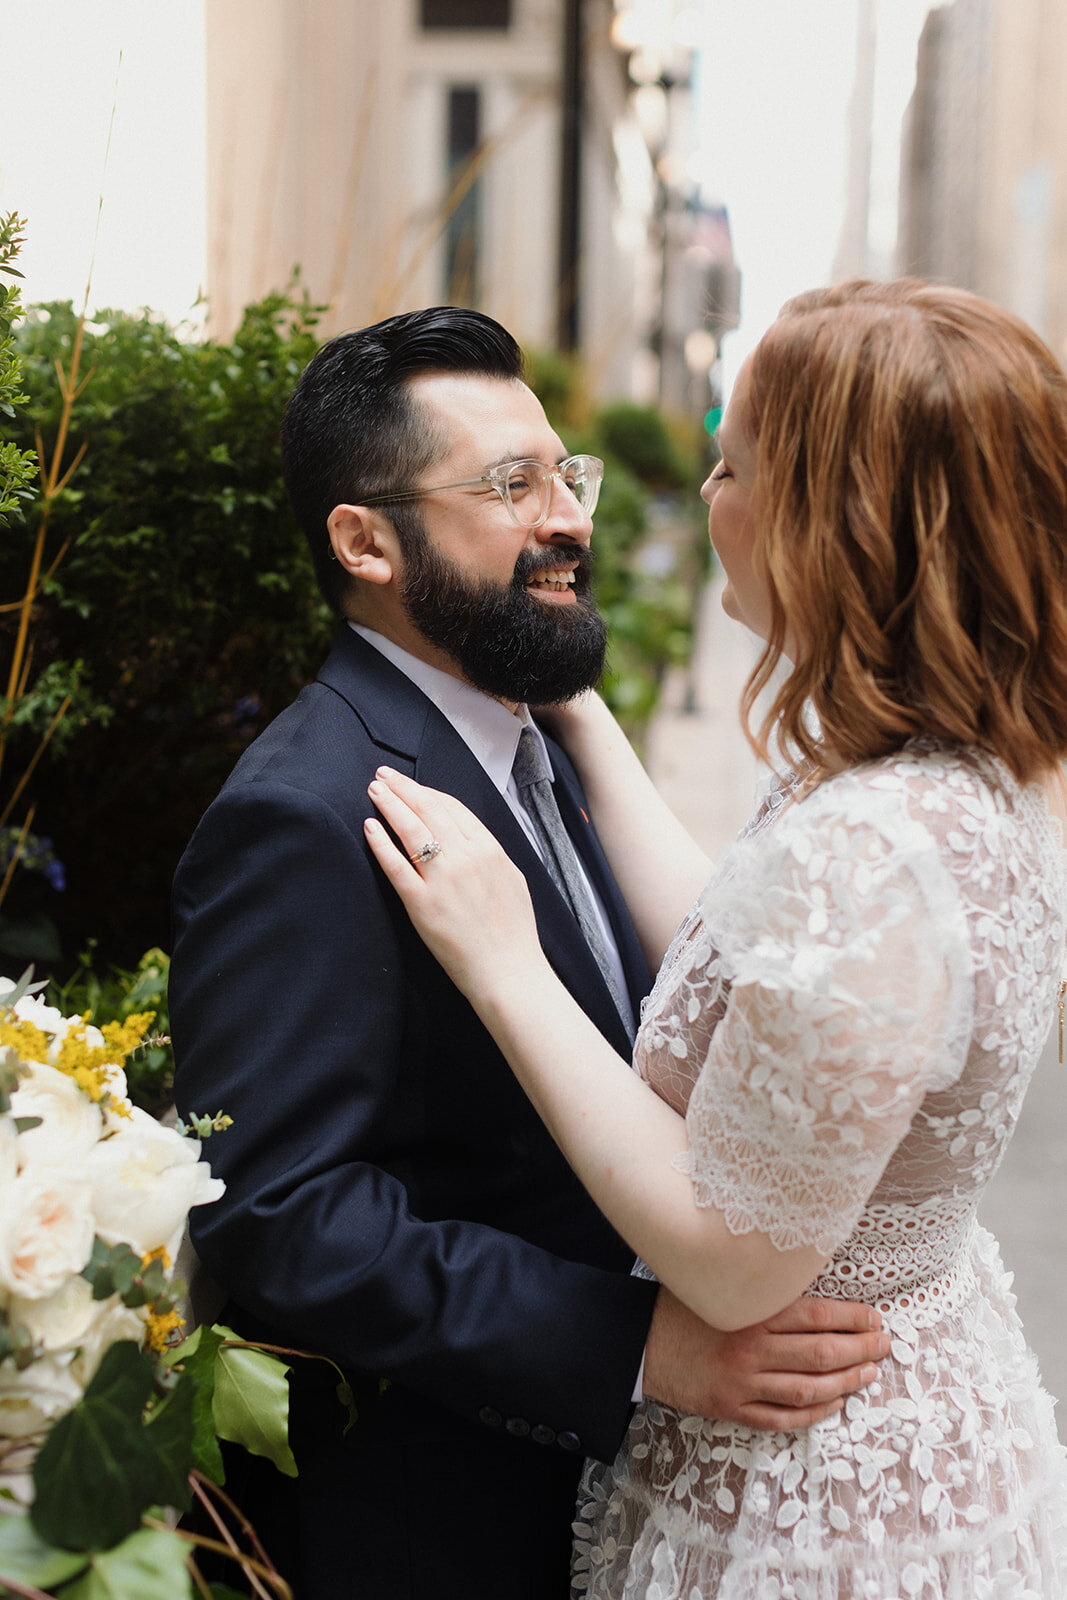 Elopement couple is very close and embracing on a street in Chicago.